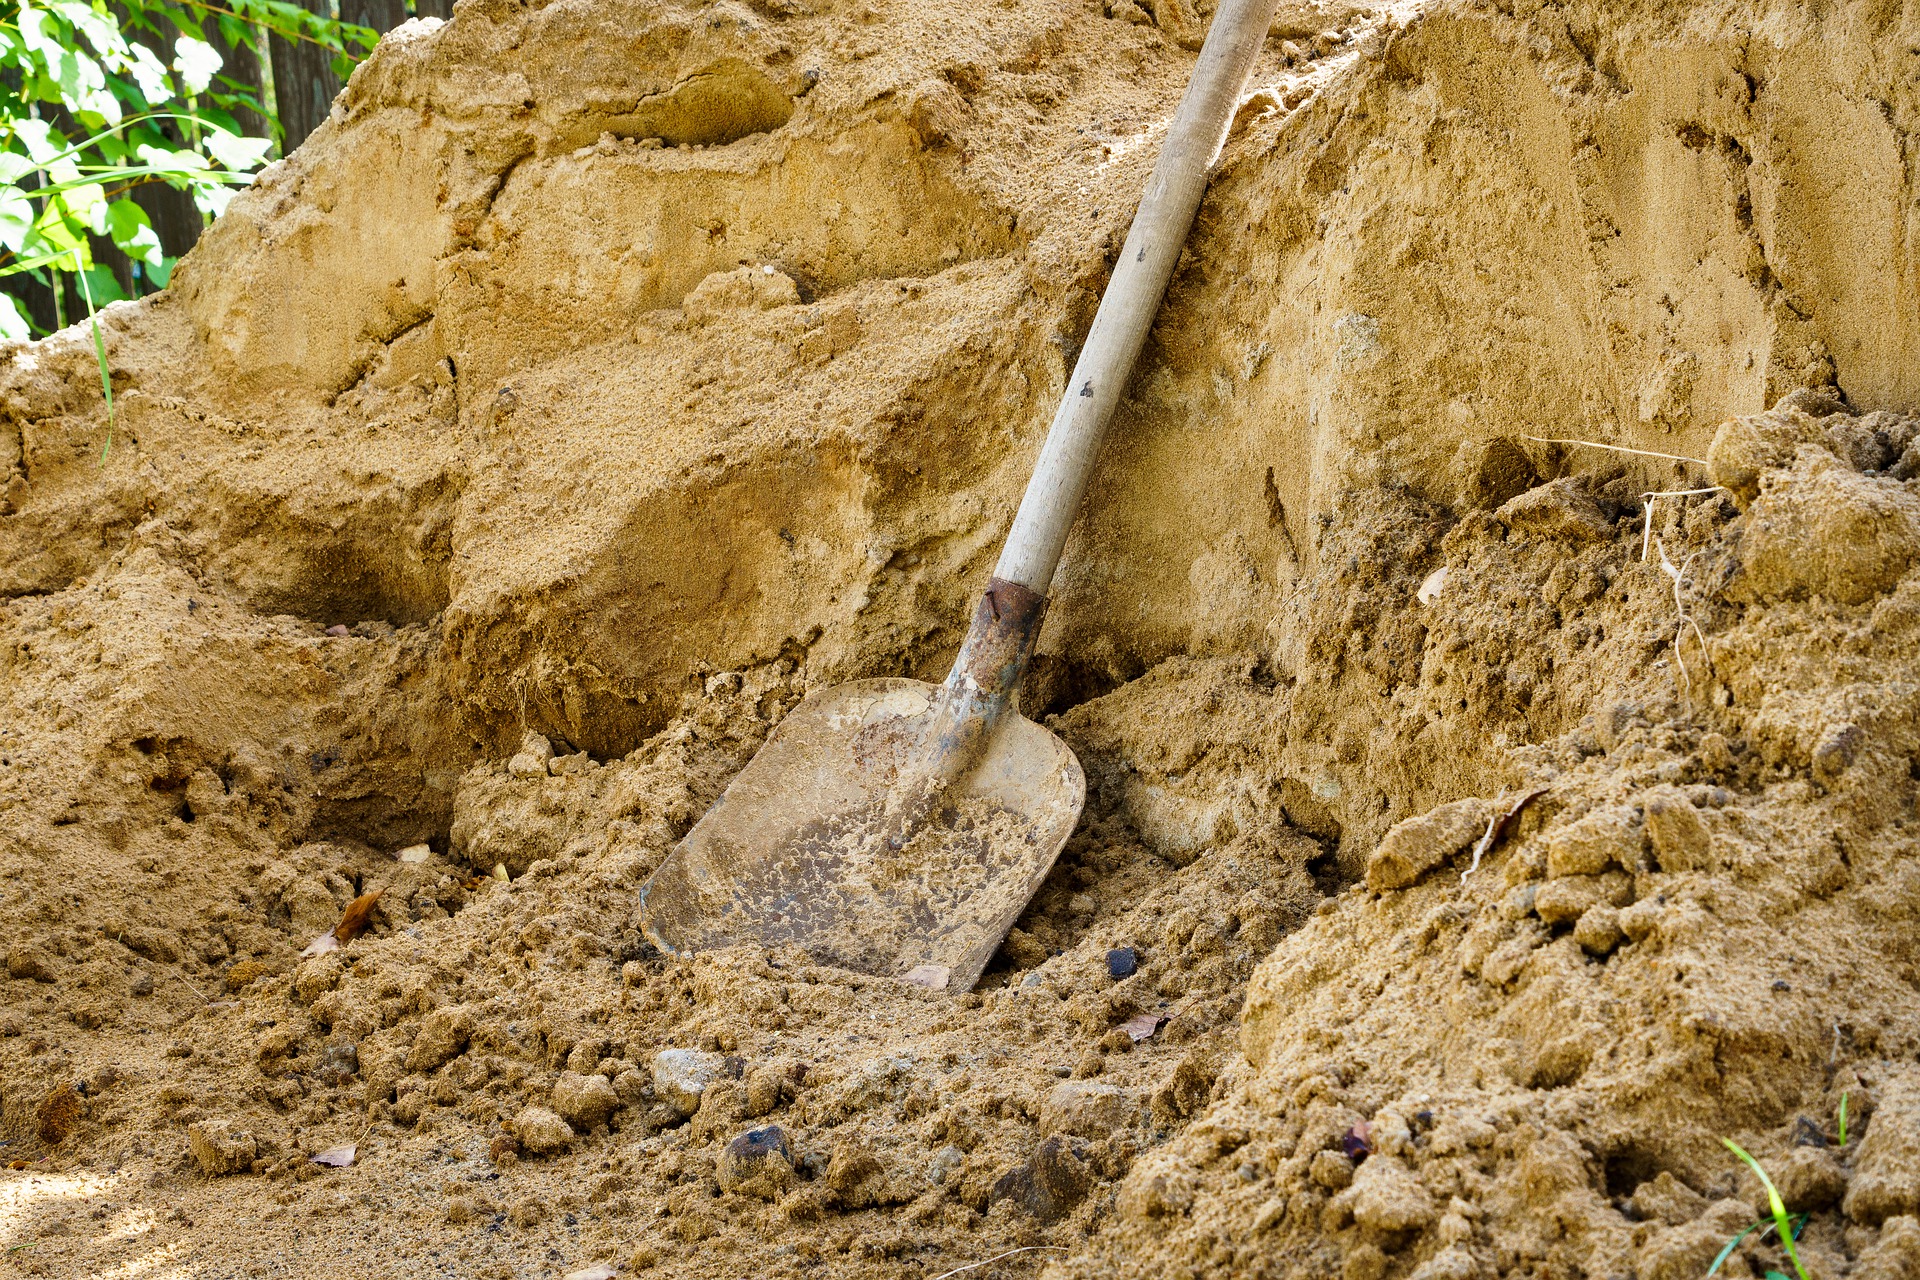 A flat shovel, an essential tool for moving landscaping dirt, beside a pile of sand.